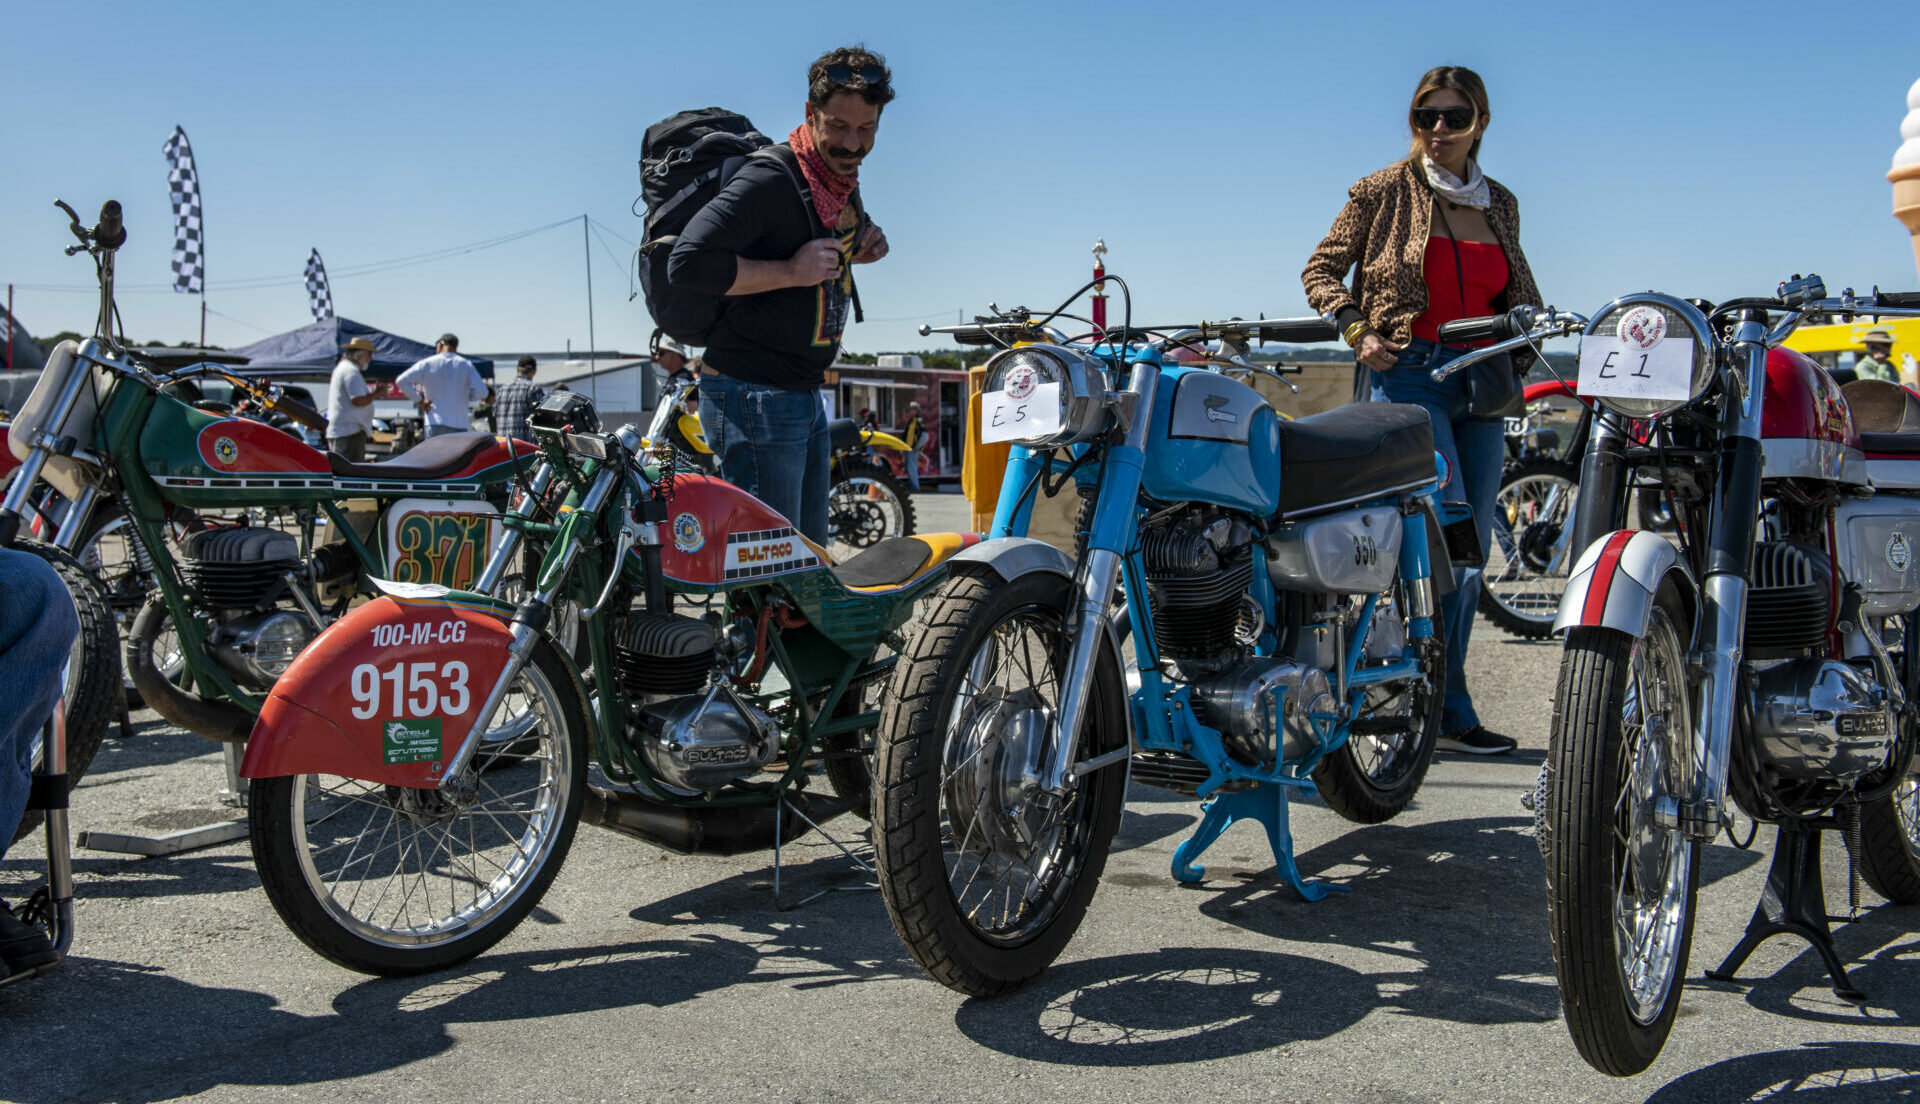 A scene from the 2022 AHRMA Classic MotoFest of Monterey. Photo by Kevin McIntosh, courtesy AHRMA.